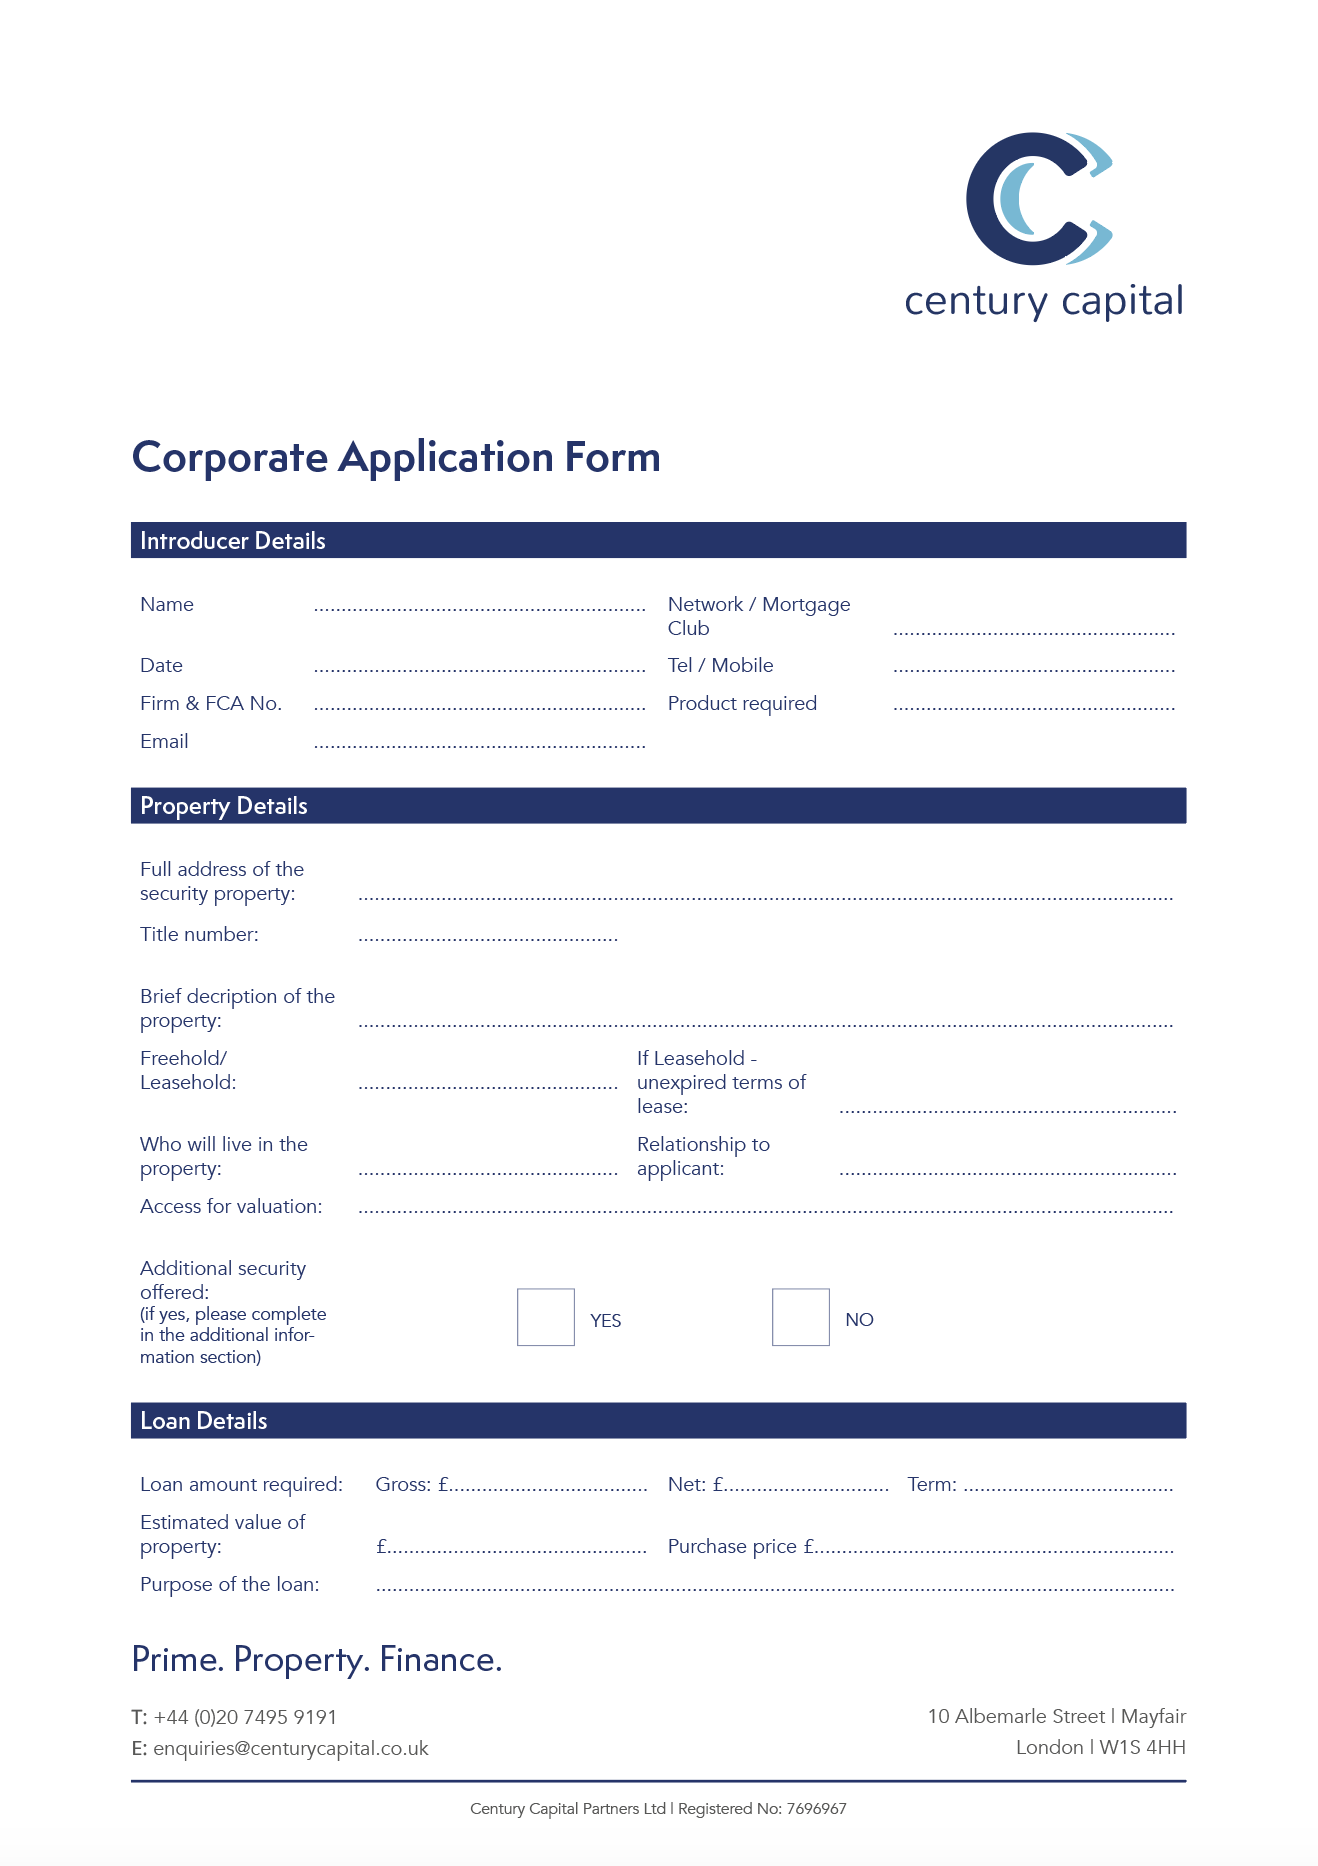 Corporate Application Form